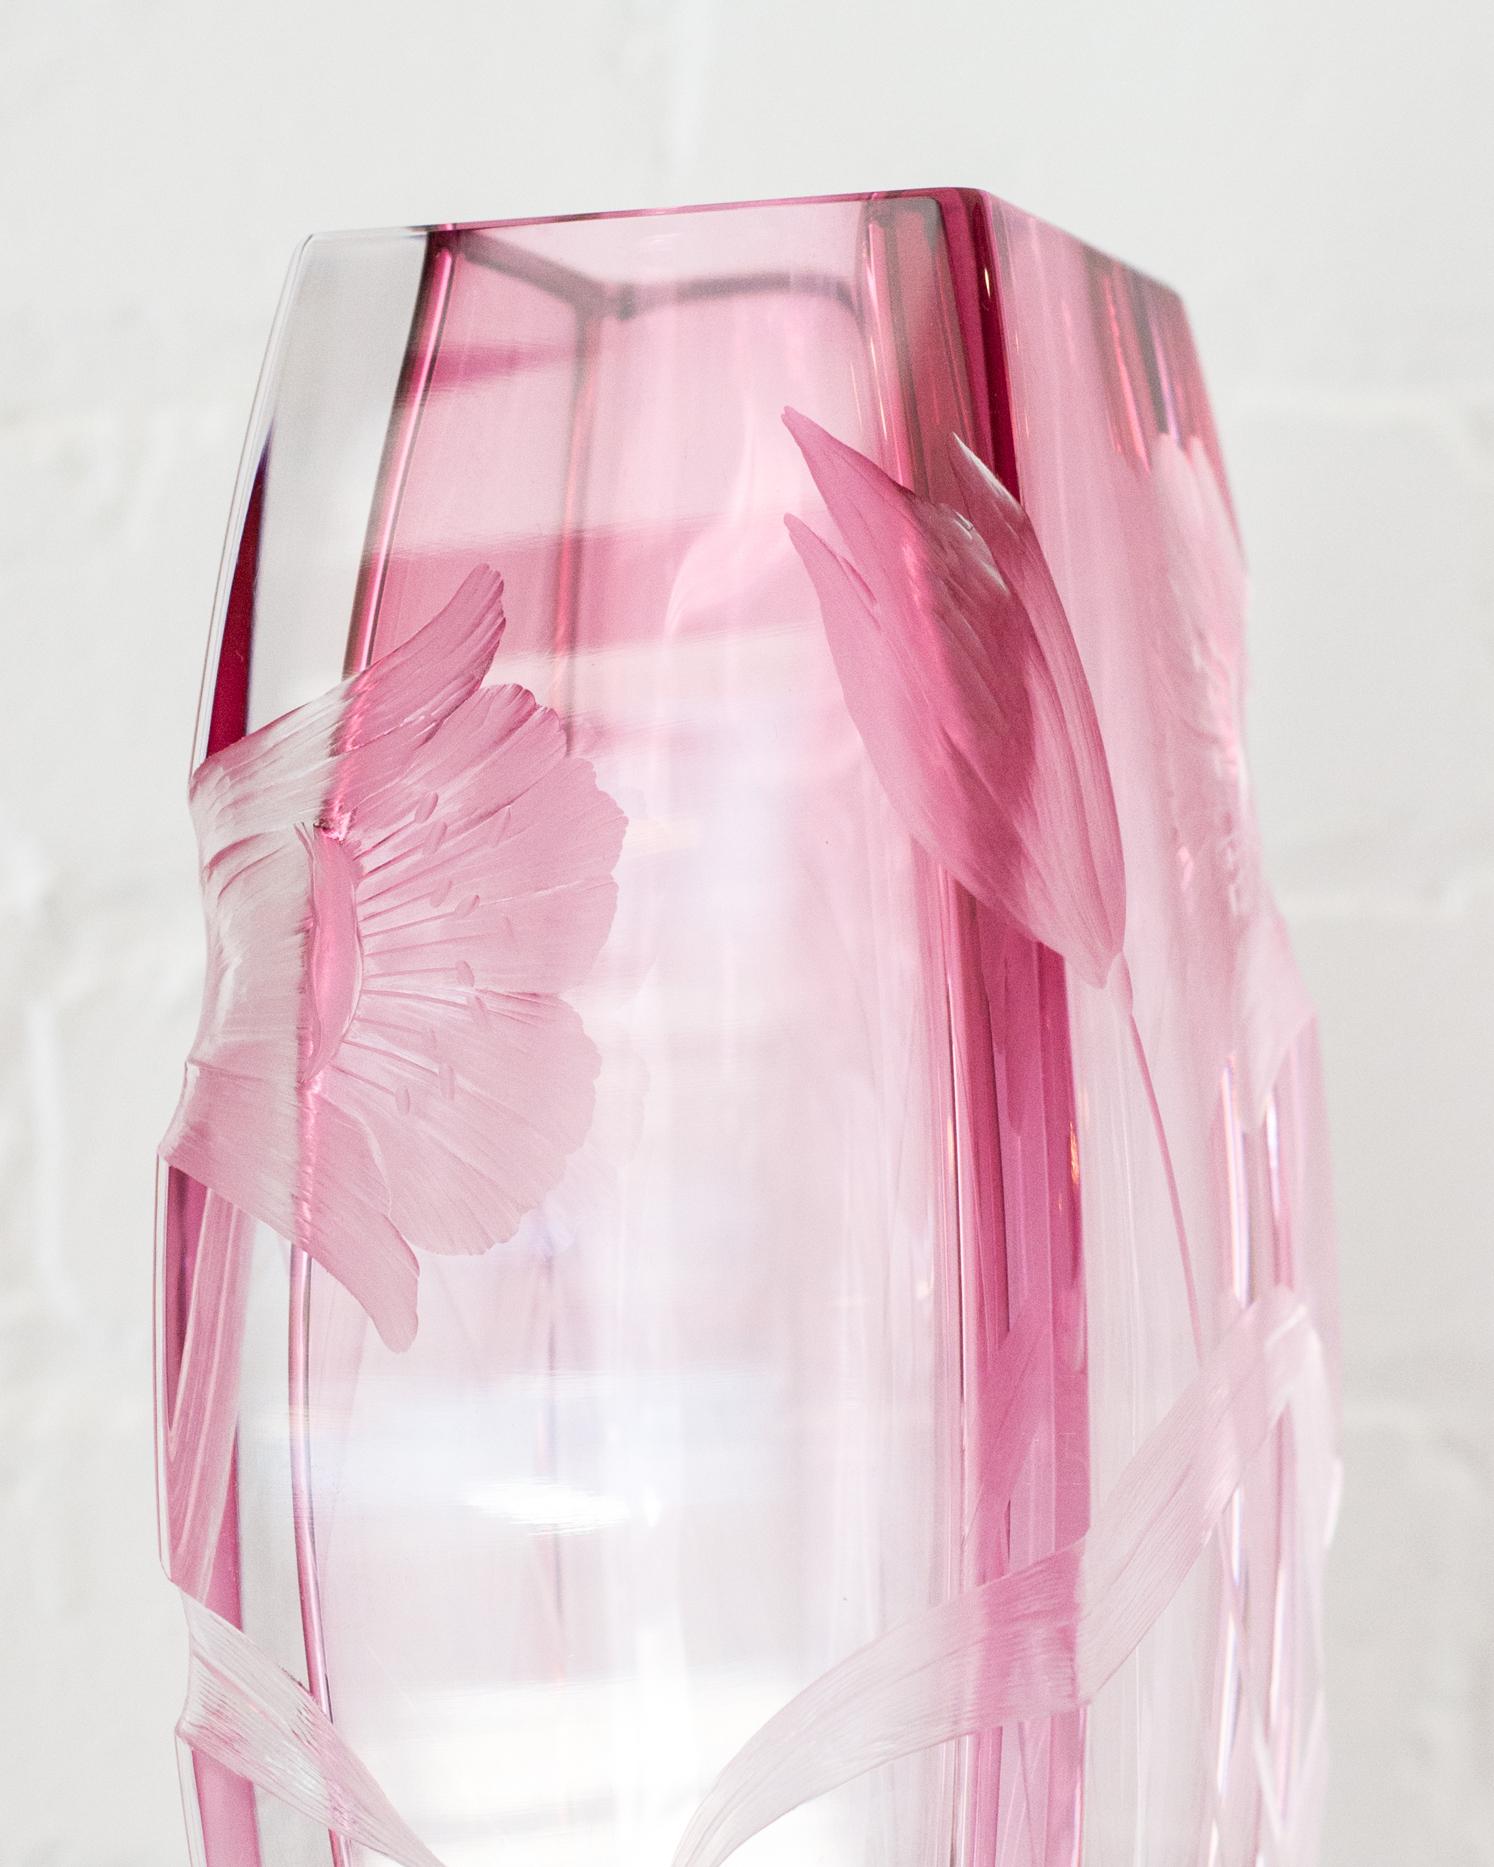 The only thing better than receiving a bouquet of flowers is receiving them in an even more beautiful vase. This contemporary pink Rosalin Moser vase is hand blown, handcut, and is the perfect size to hold flowers. Even empty, it is a stunning